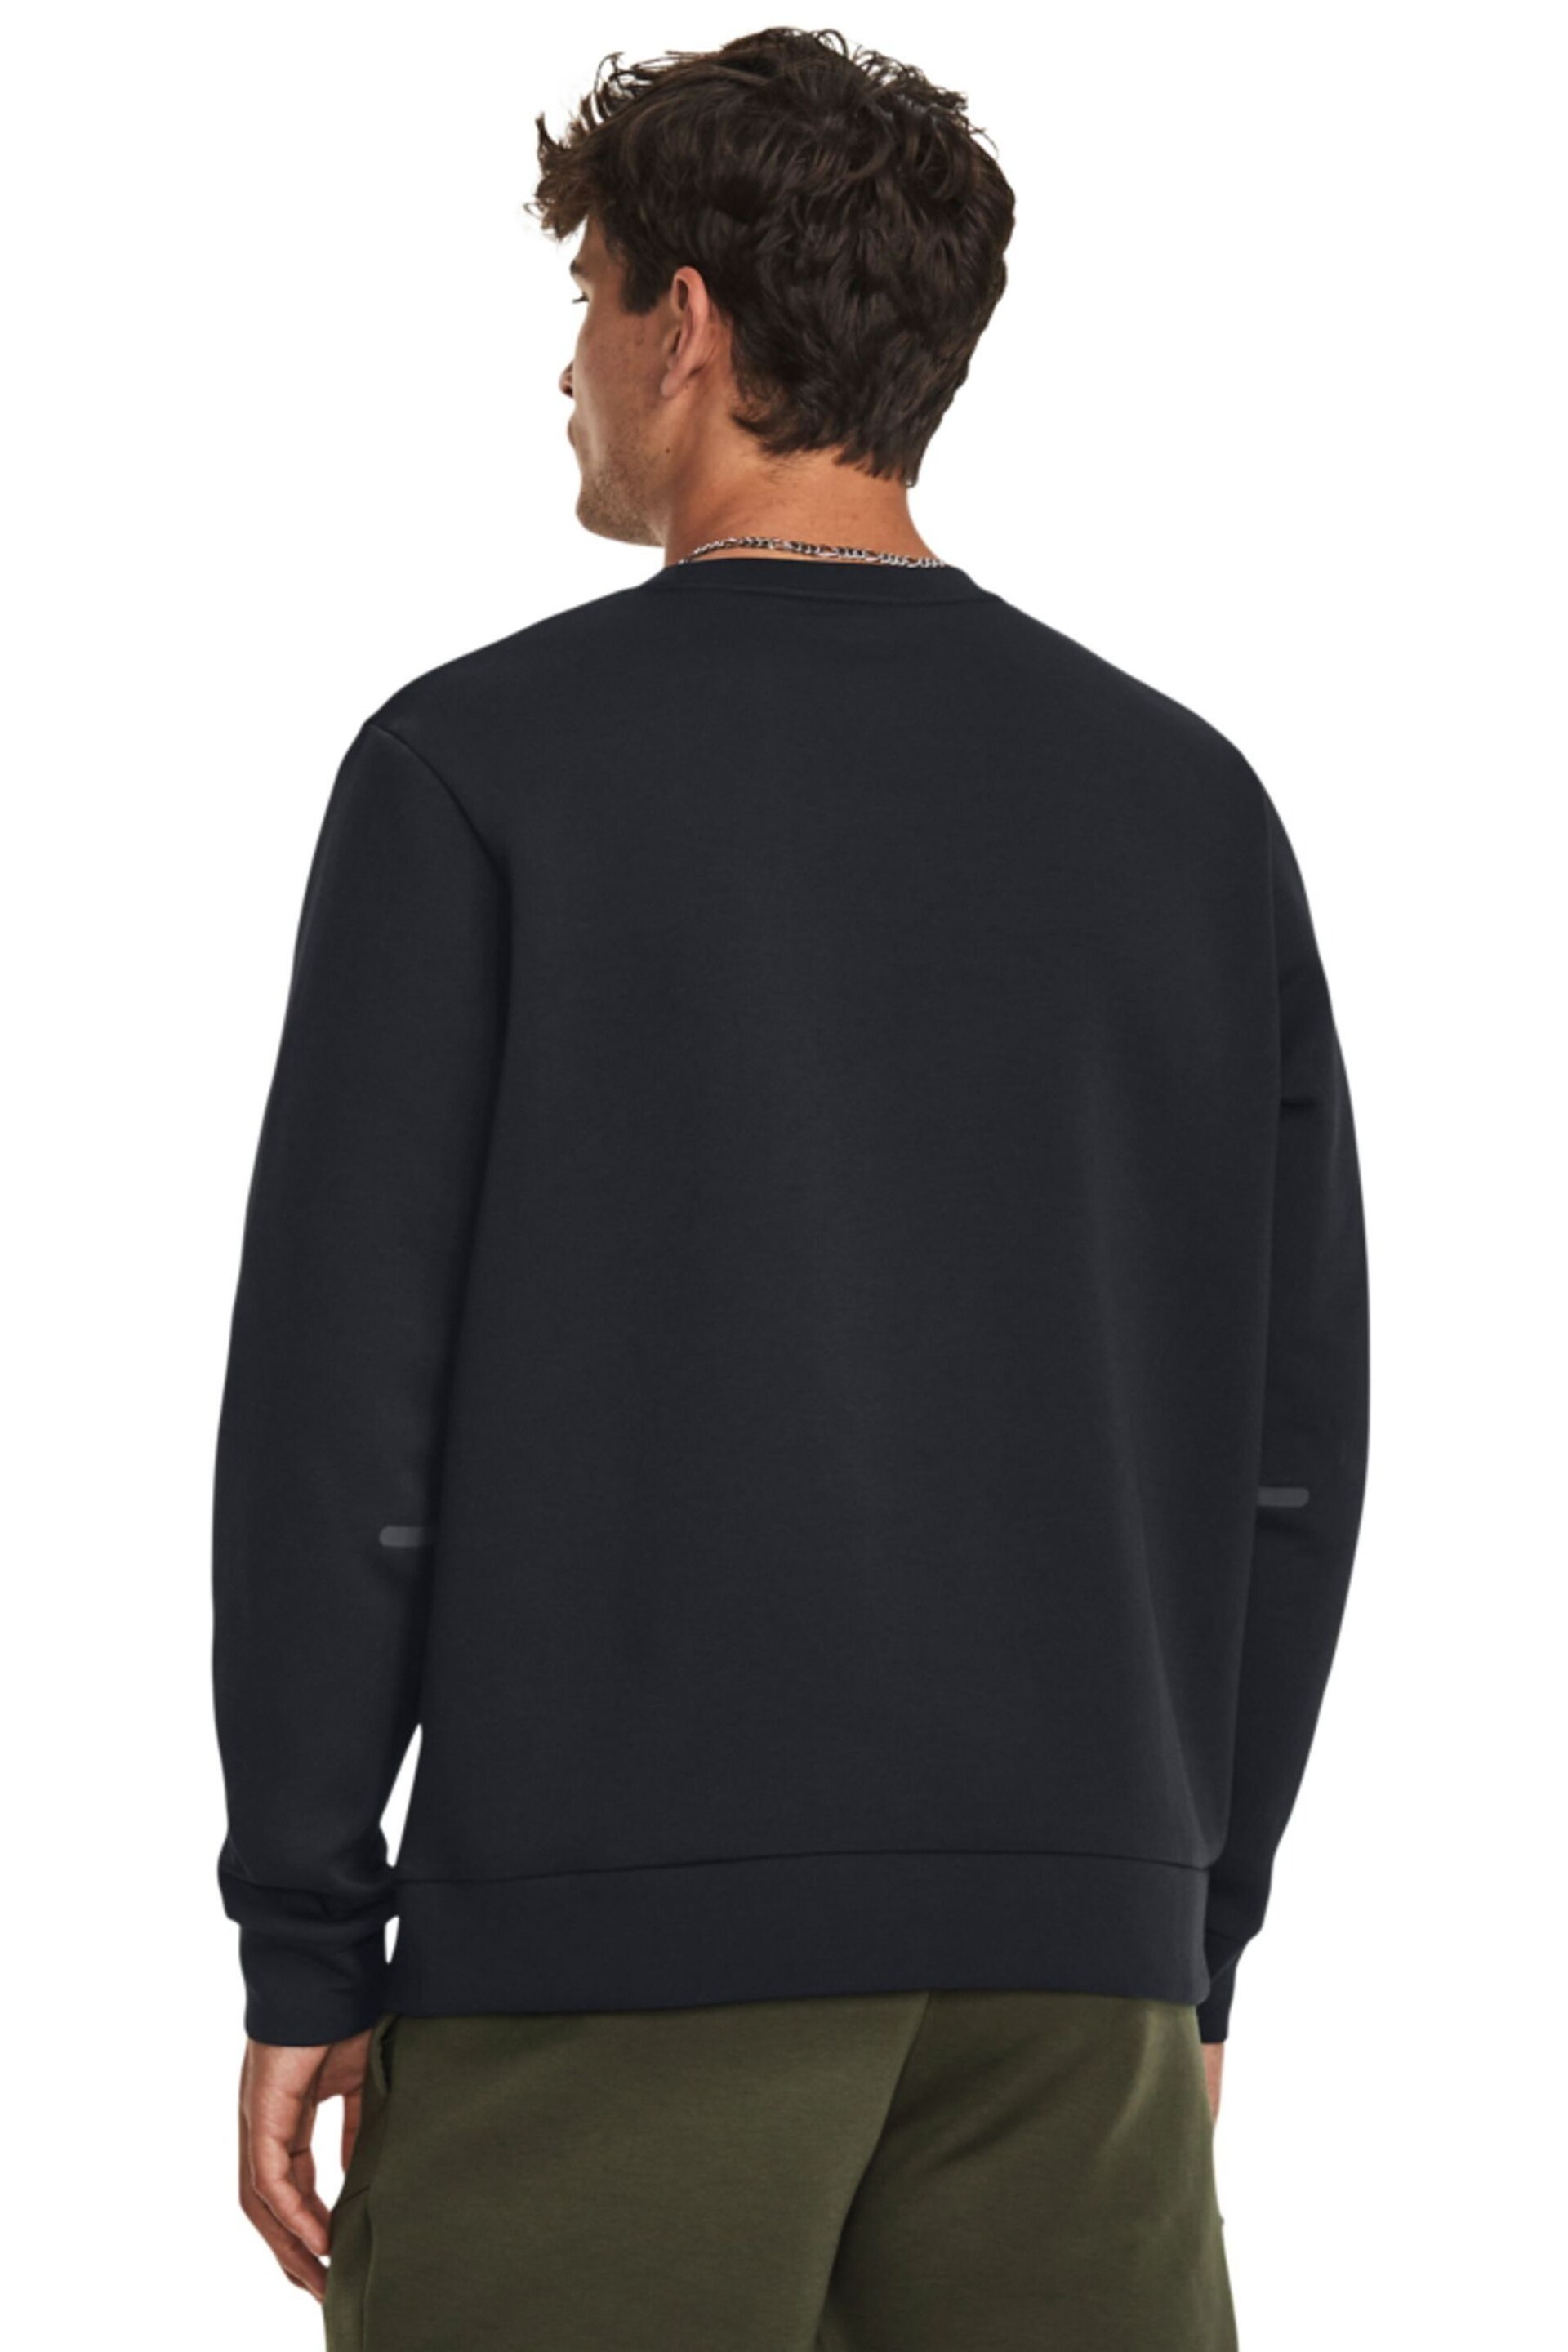 Under Armour Black Unstoppable Crew Neck Fleece - Image 2 of 6